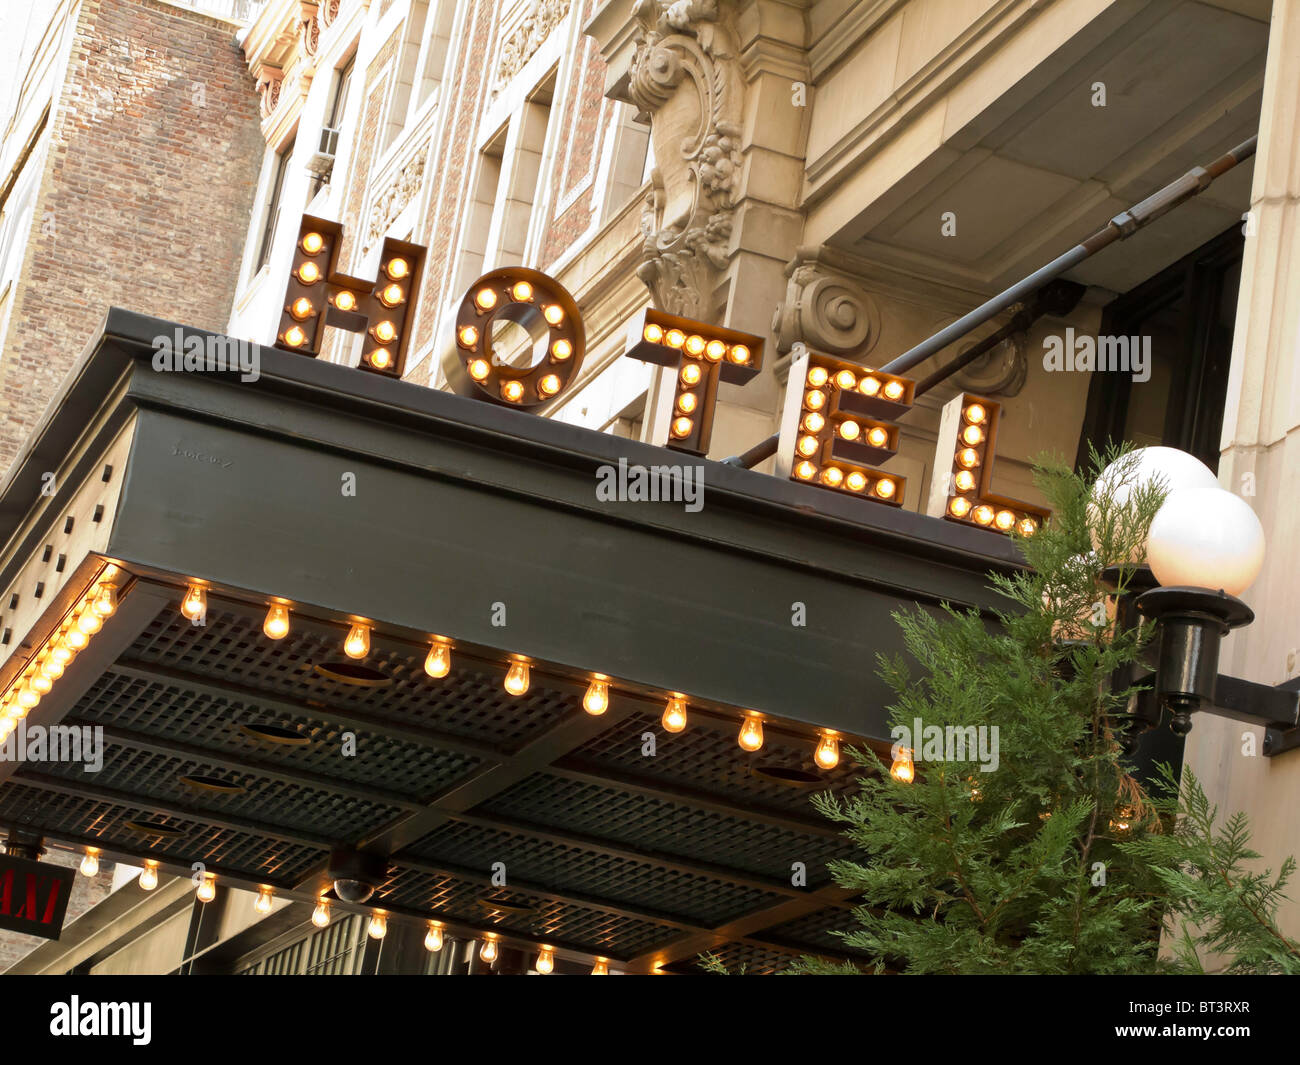 Ace Hotel Marquee, 20 West 29th Street, Chelsea, NYC Stock Photo